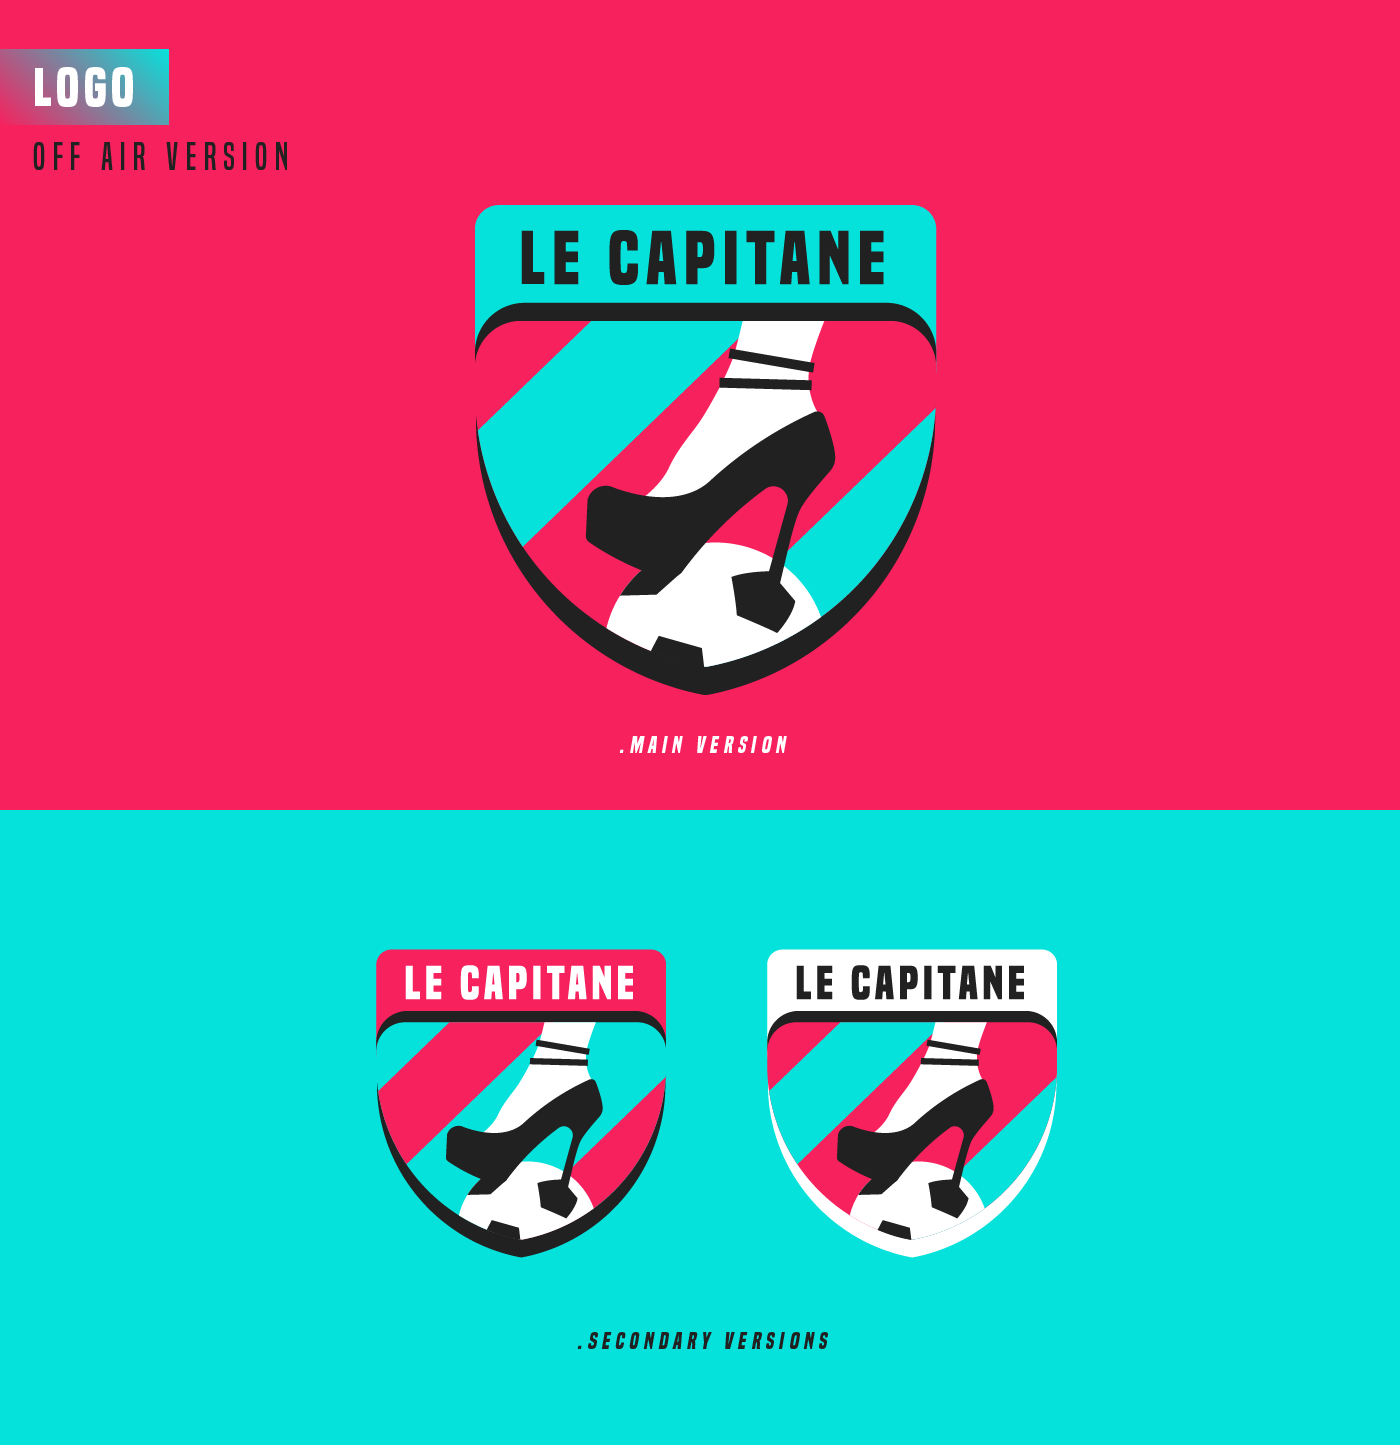 Le capitane Capitane wags soccer team spike Channel tv graphic pack Viacom